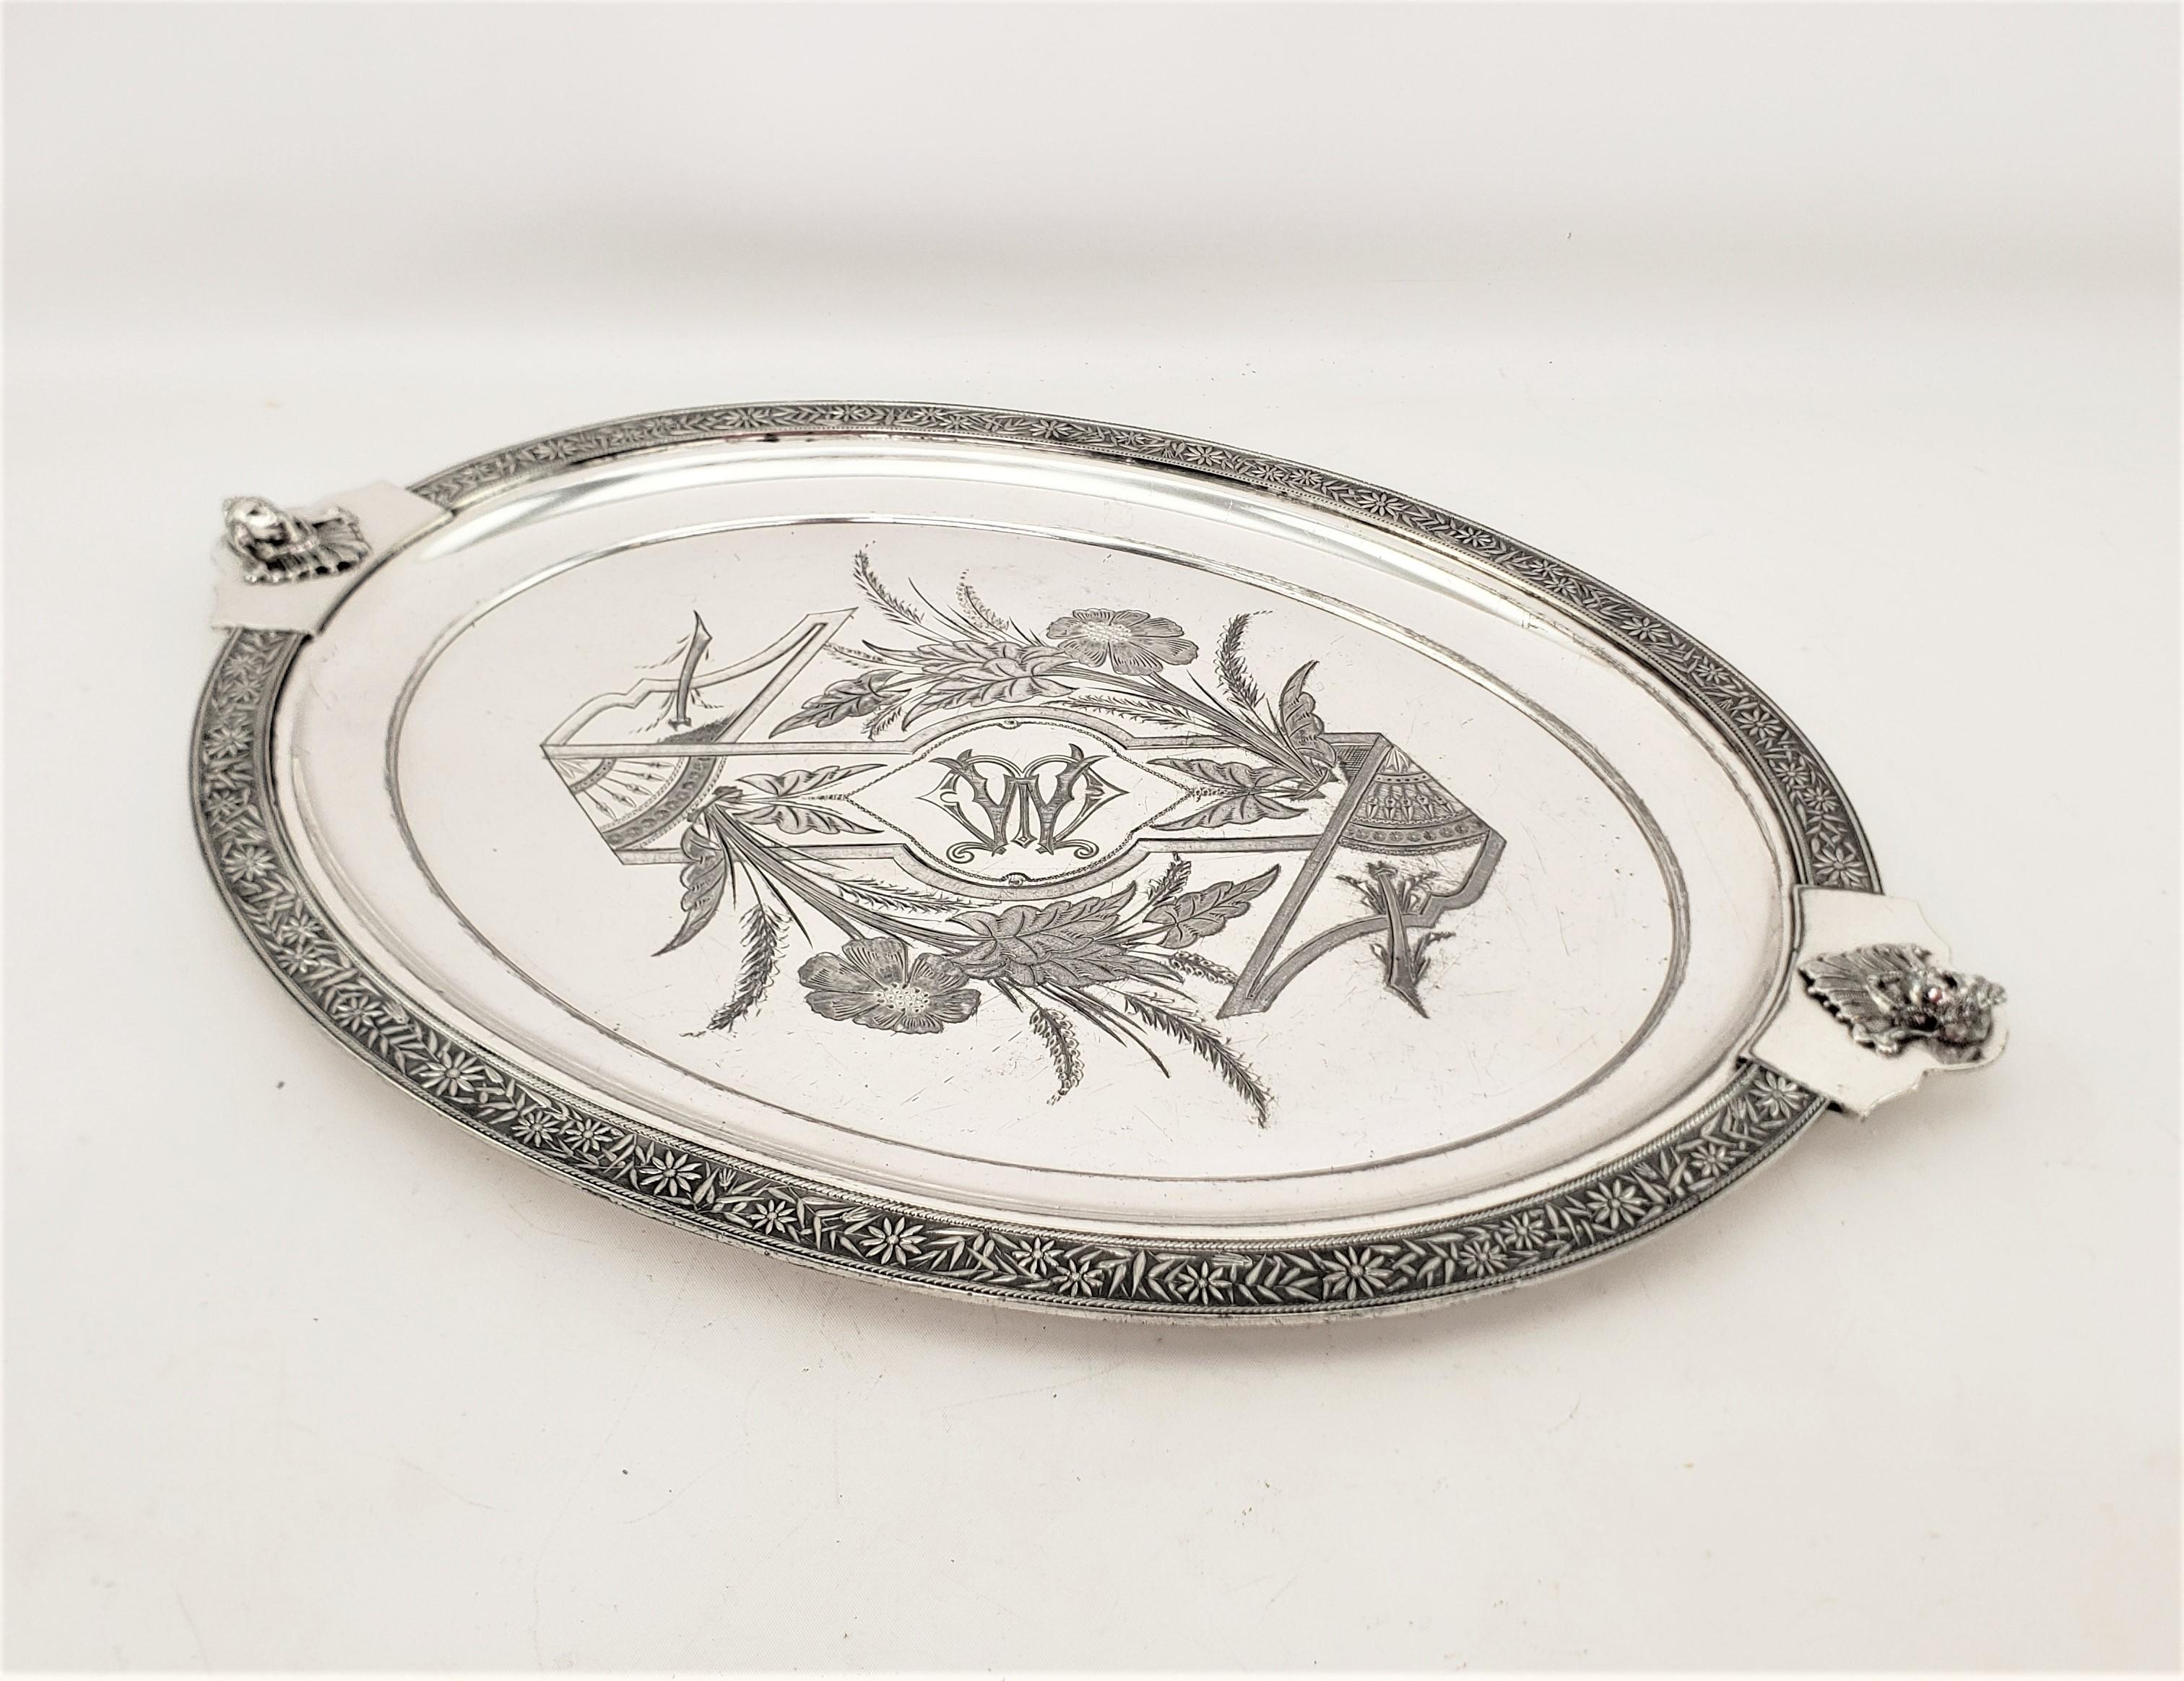 20th Century Antique English Silver Plated Serving Tray with Neoclassical Styled Decoration For Sale